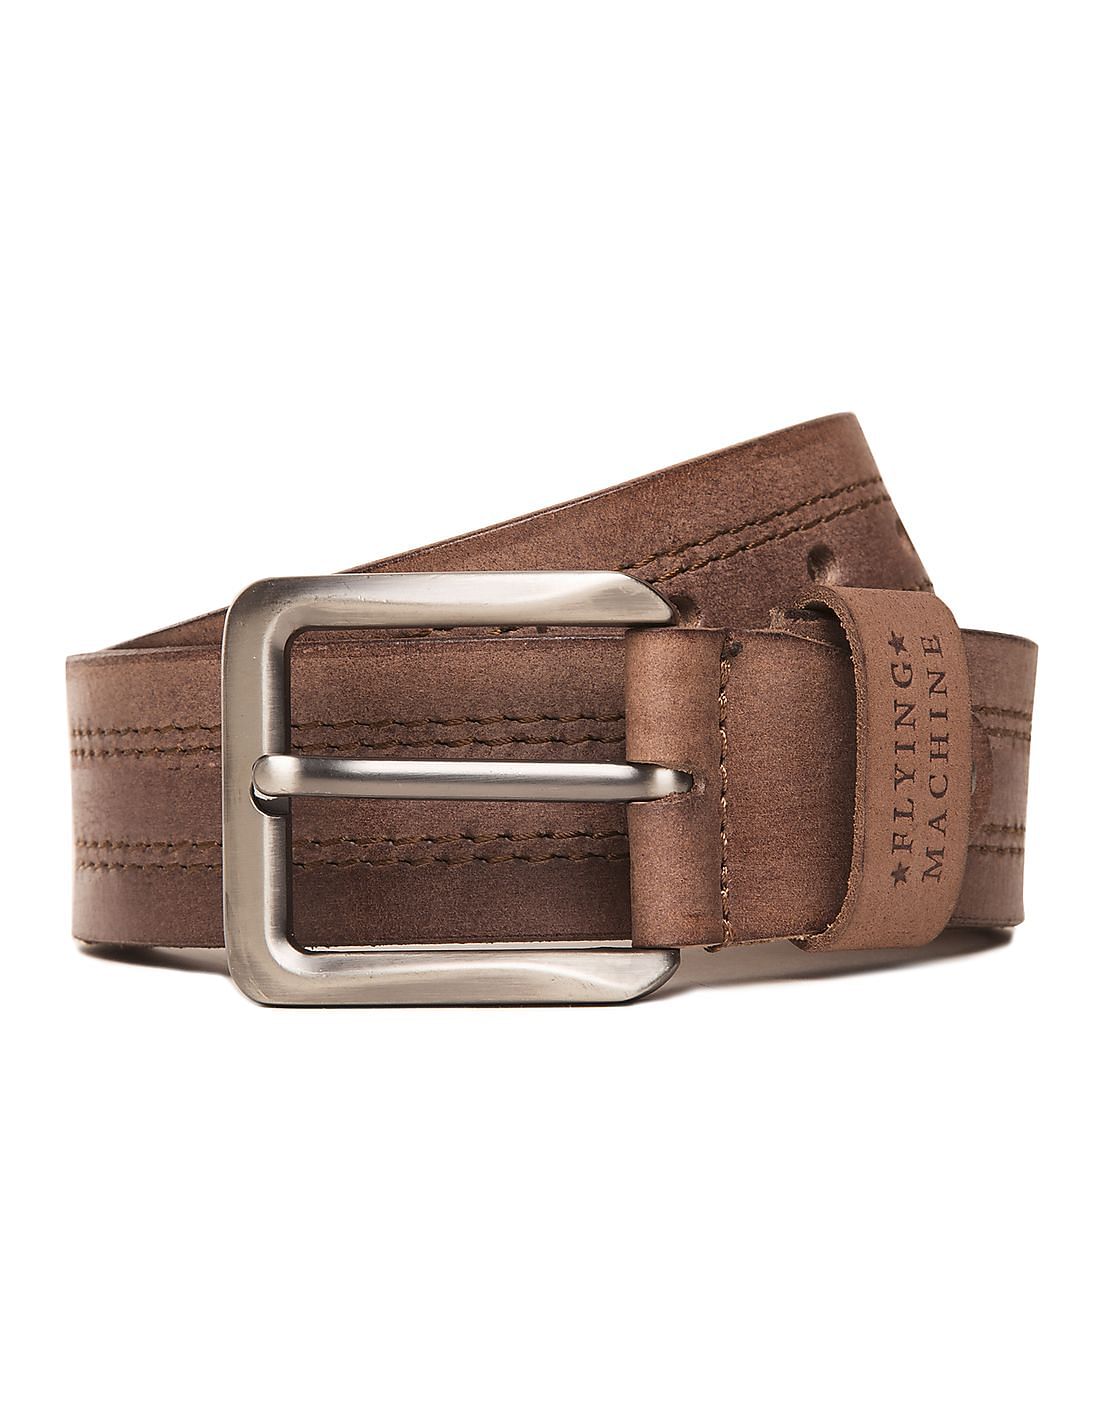 Buy Flying Machine Distressed Leather Belt - NNNOW.com